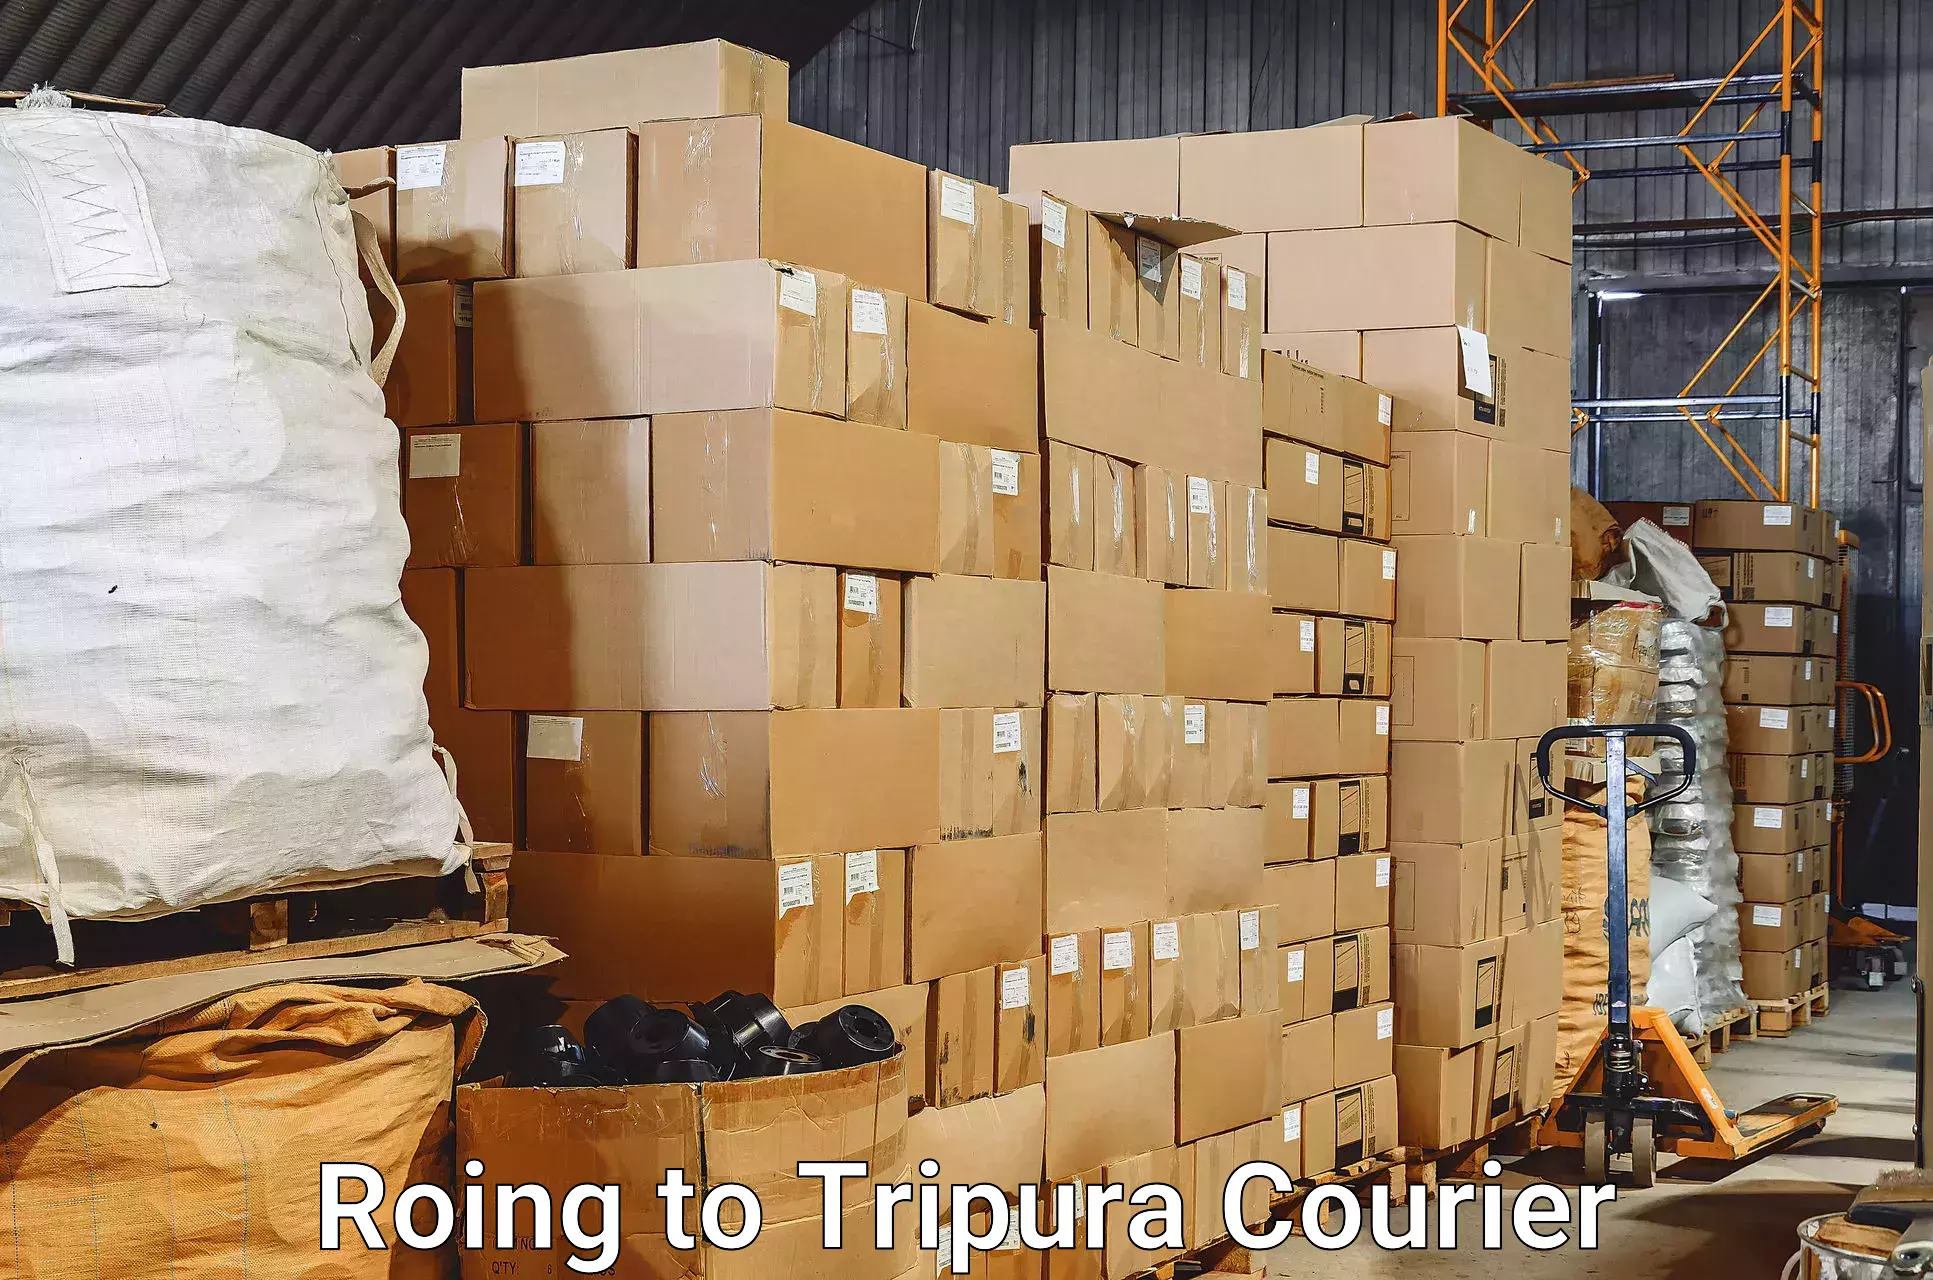 Luggage delivery system Roing to Tripura